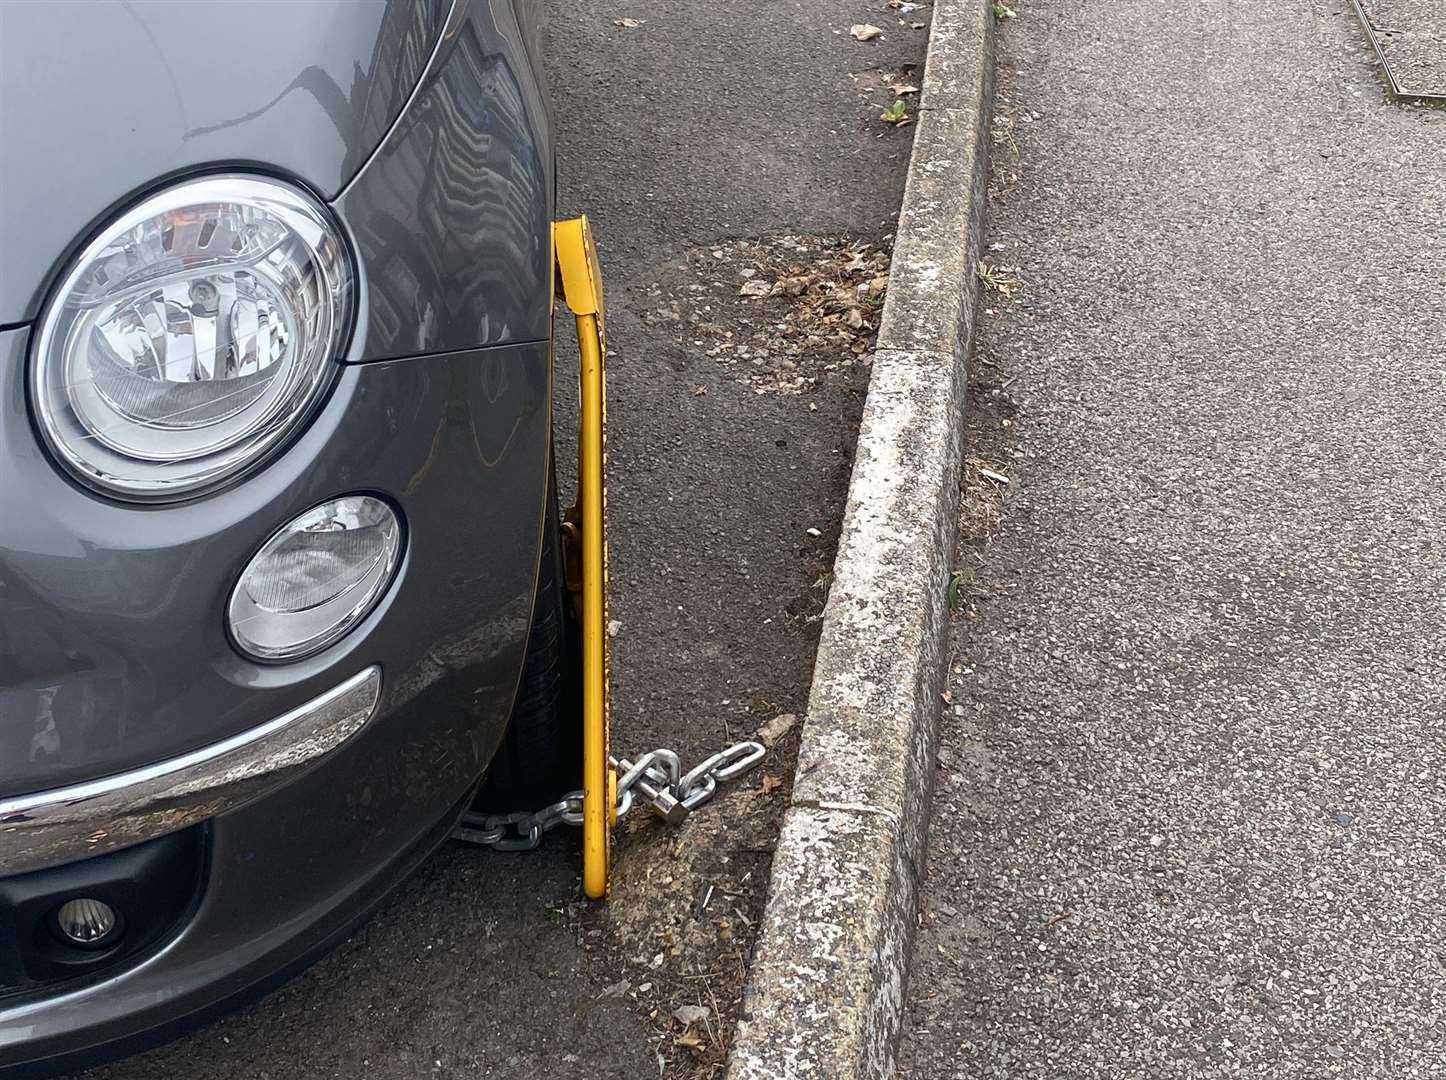 Staff thought the clamped car was a prank at first. Picture: Max Mannouch